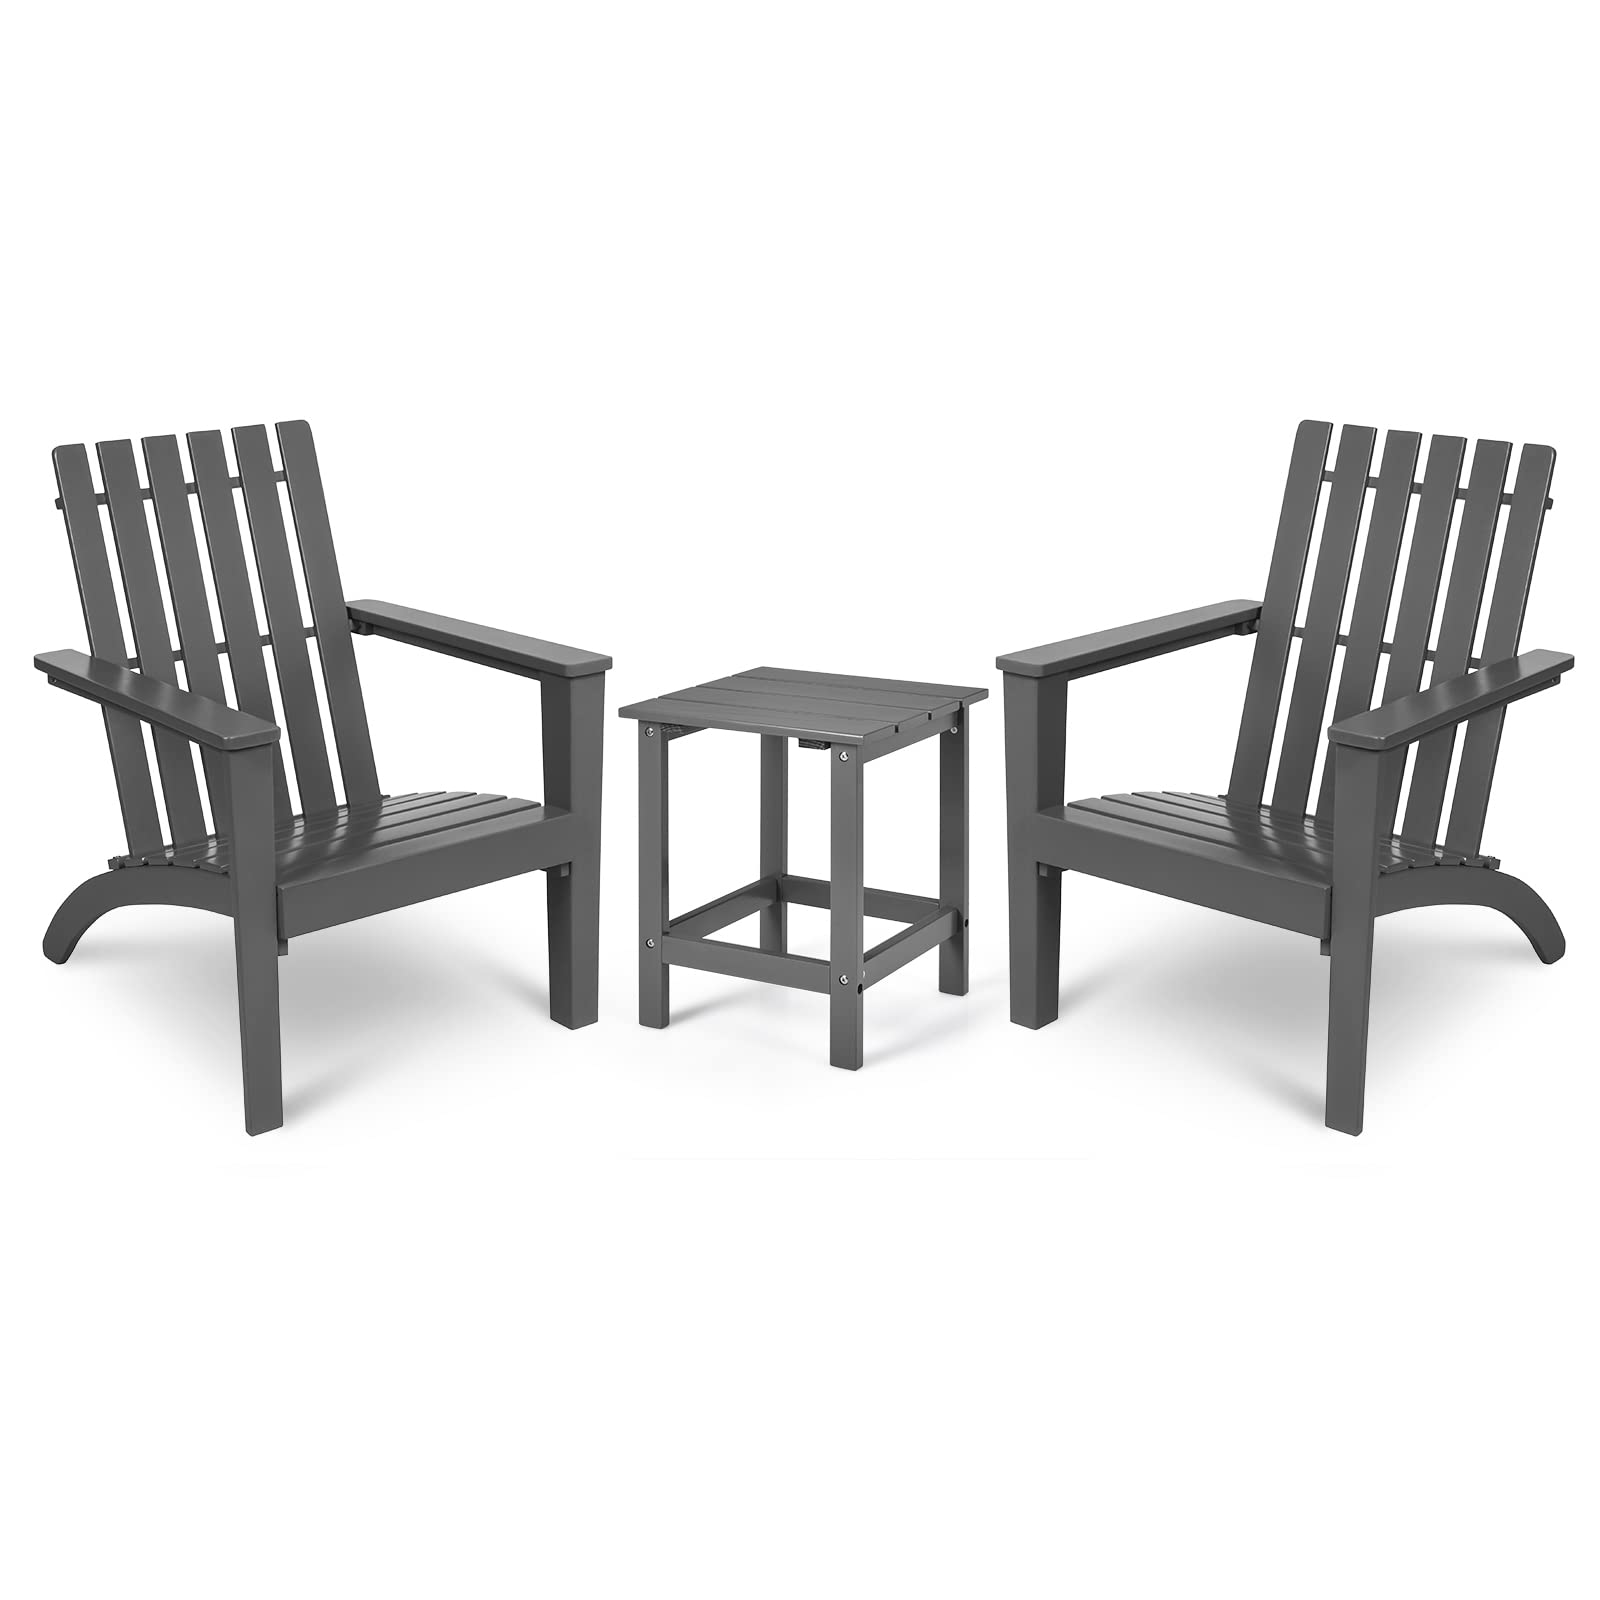 Giantex Wood Adirondack Chair & Side Table Set, Patio Bistro Set with Slatted Design